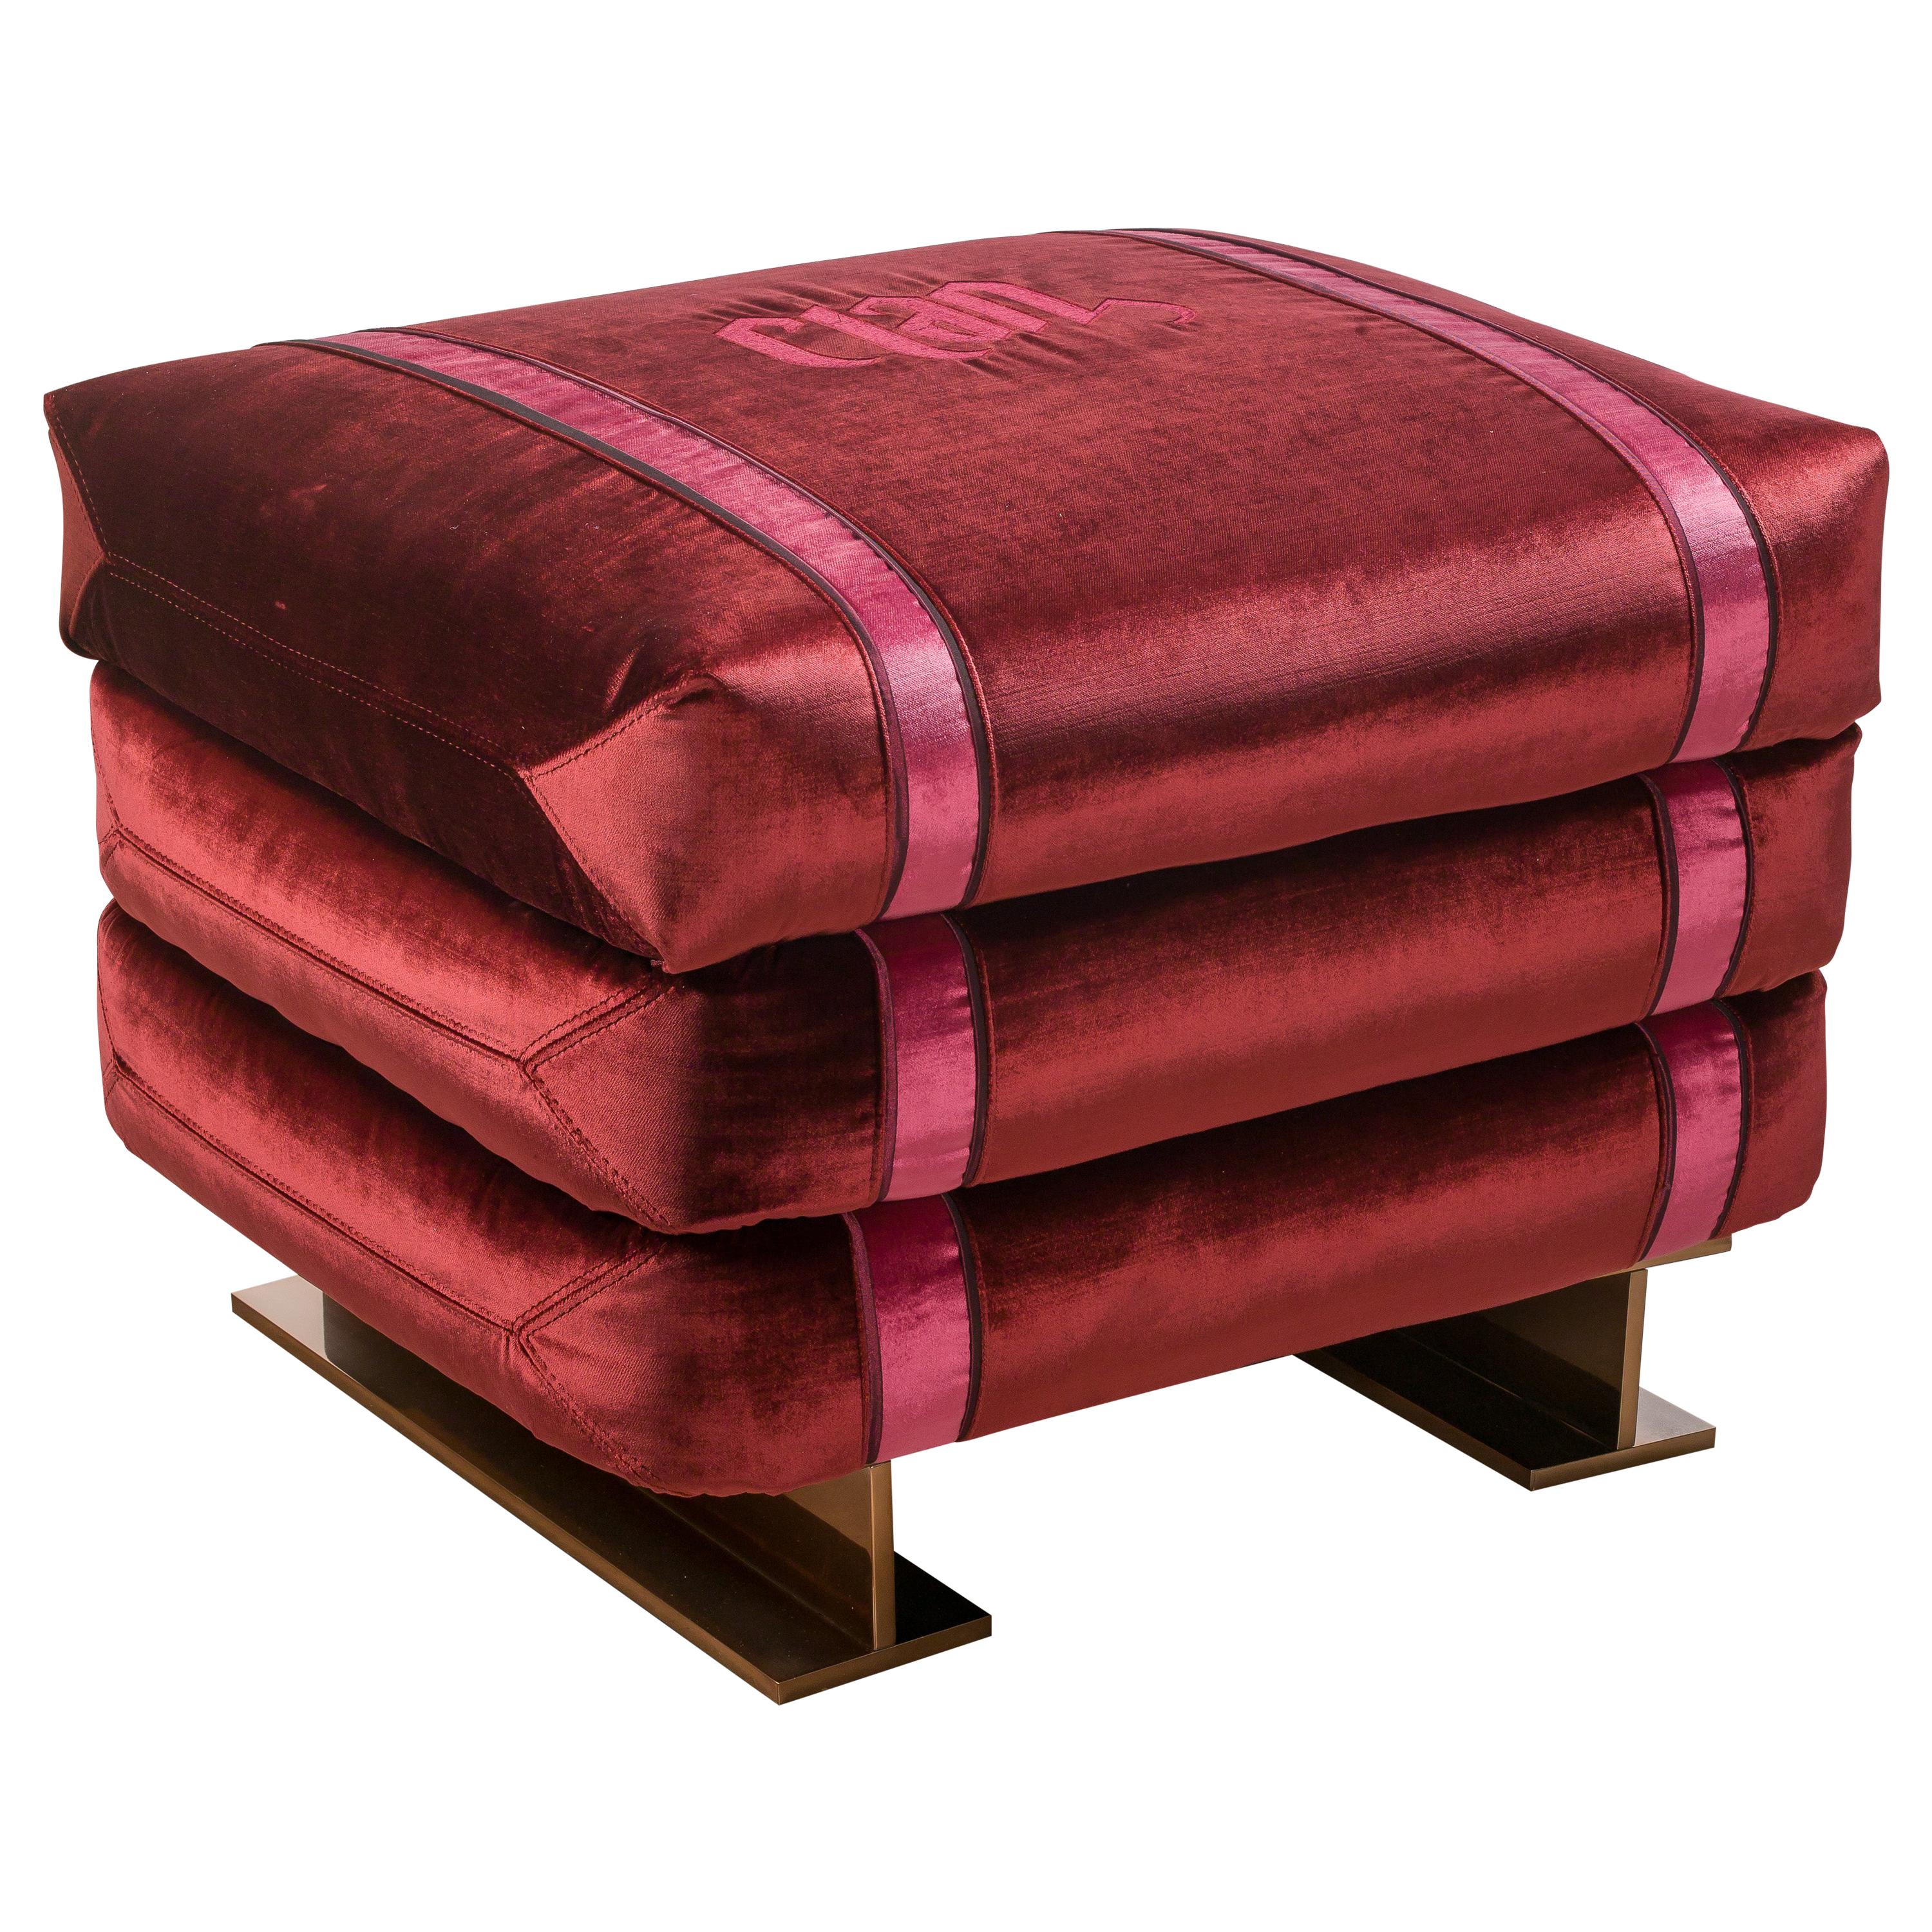 Sacco, Fashion Pouf in Cement Boxes Shape For Sale